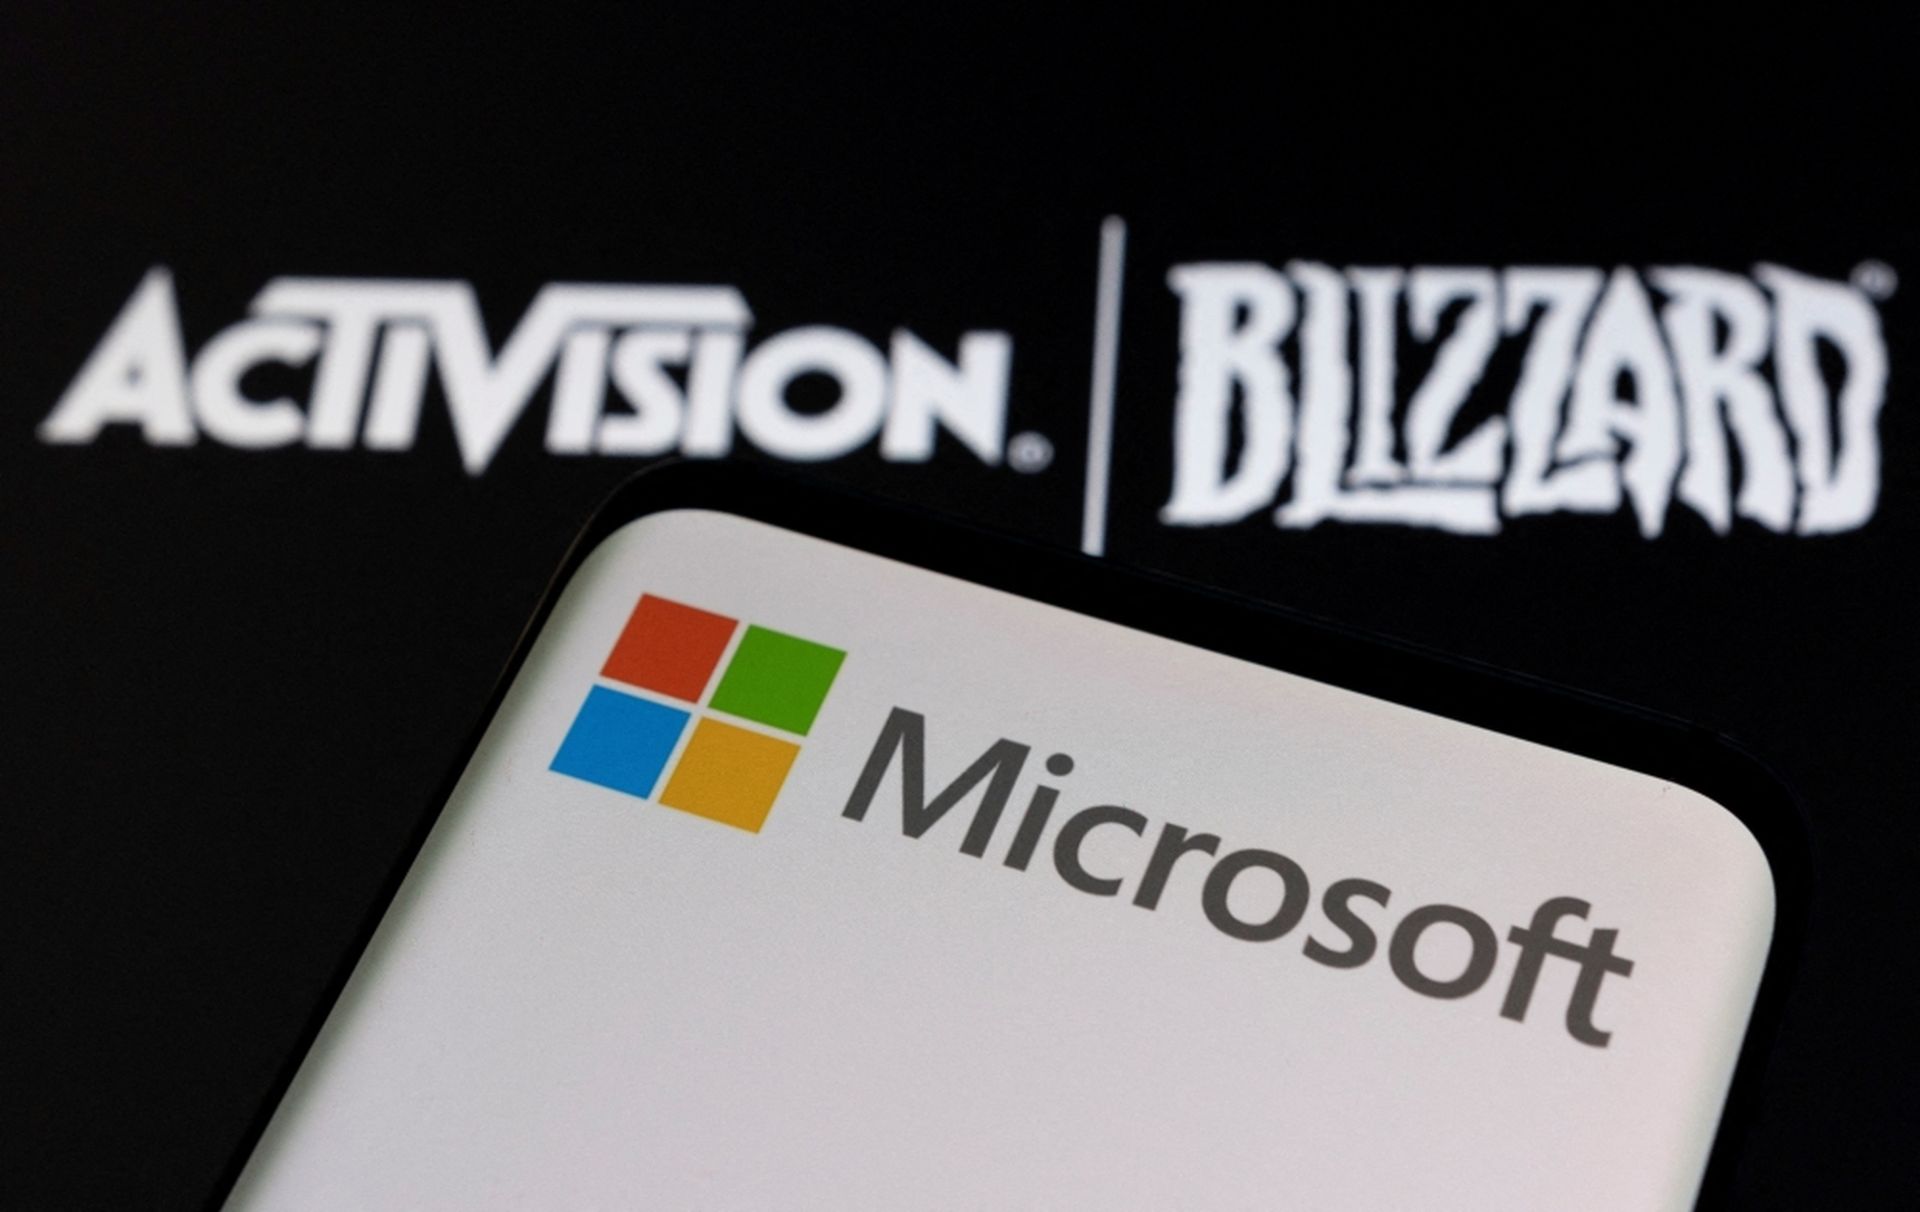 Microsoft went on and acquired Activision Blizzard and so the famous FPS franchise Call of Duty coming to Game Pass for all subscribers to enjoy. 